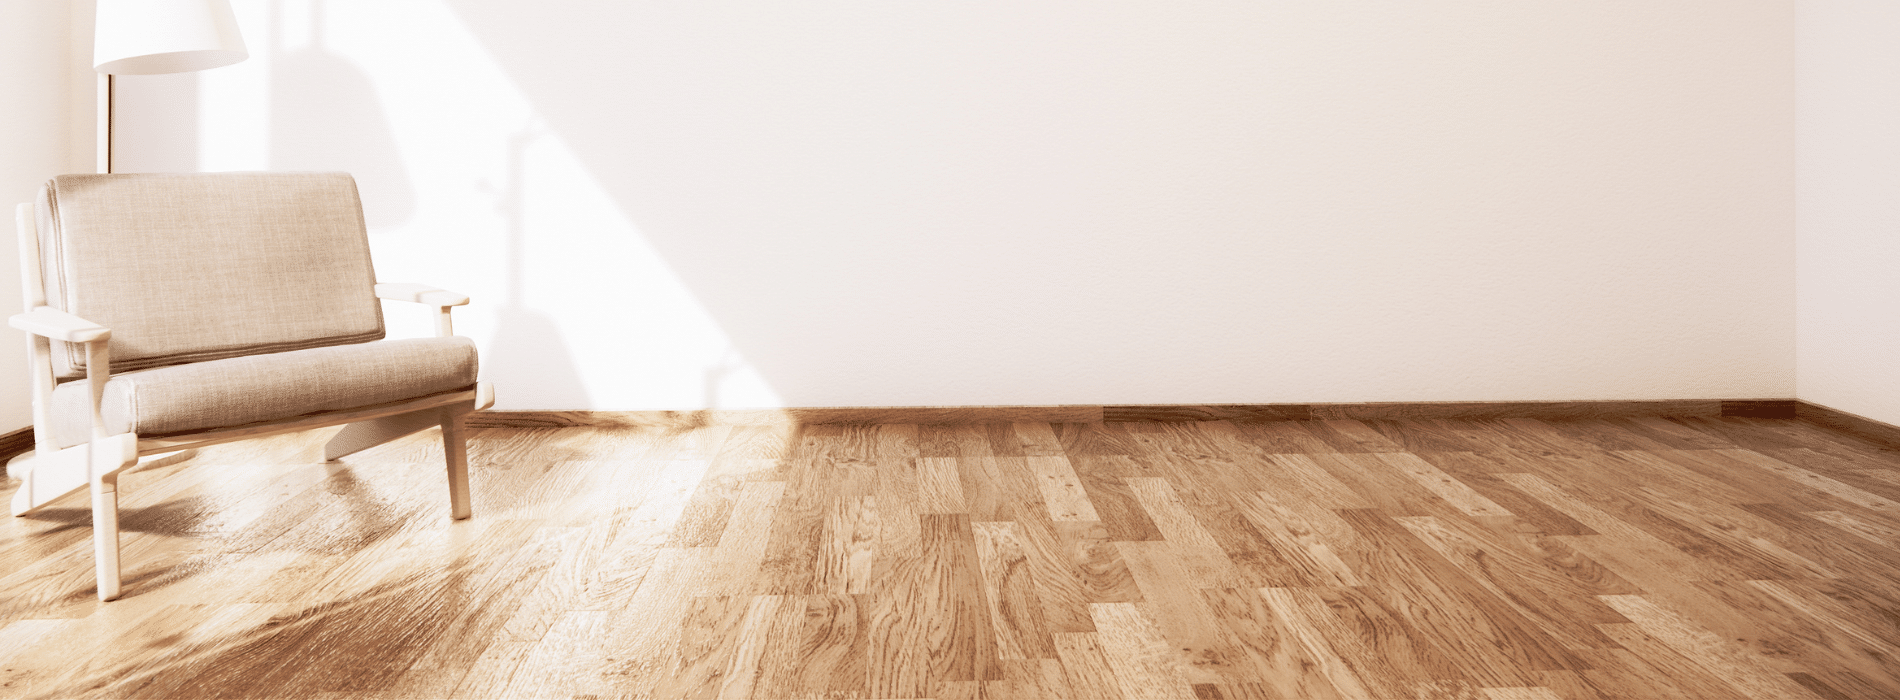 Expertly restored 5-year-old hardwood floor in Camberwell, SE5. Mr Sander® used Bona 2K Frost whitewashing and Traffic HD 15% sheen matte lacquer. Durable and stunning, this finish guarantees long-lasting beauty.